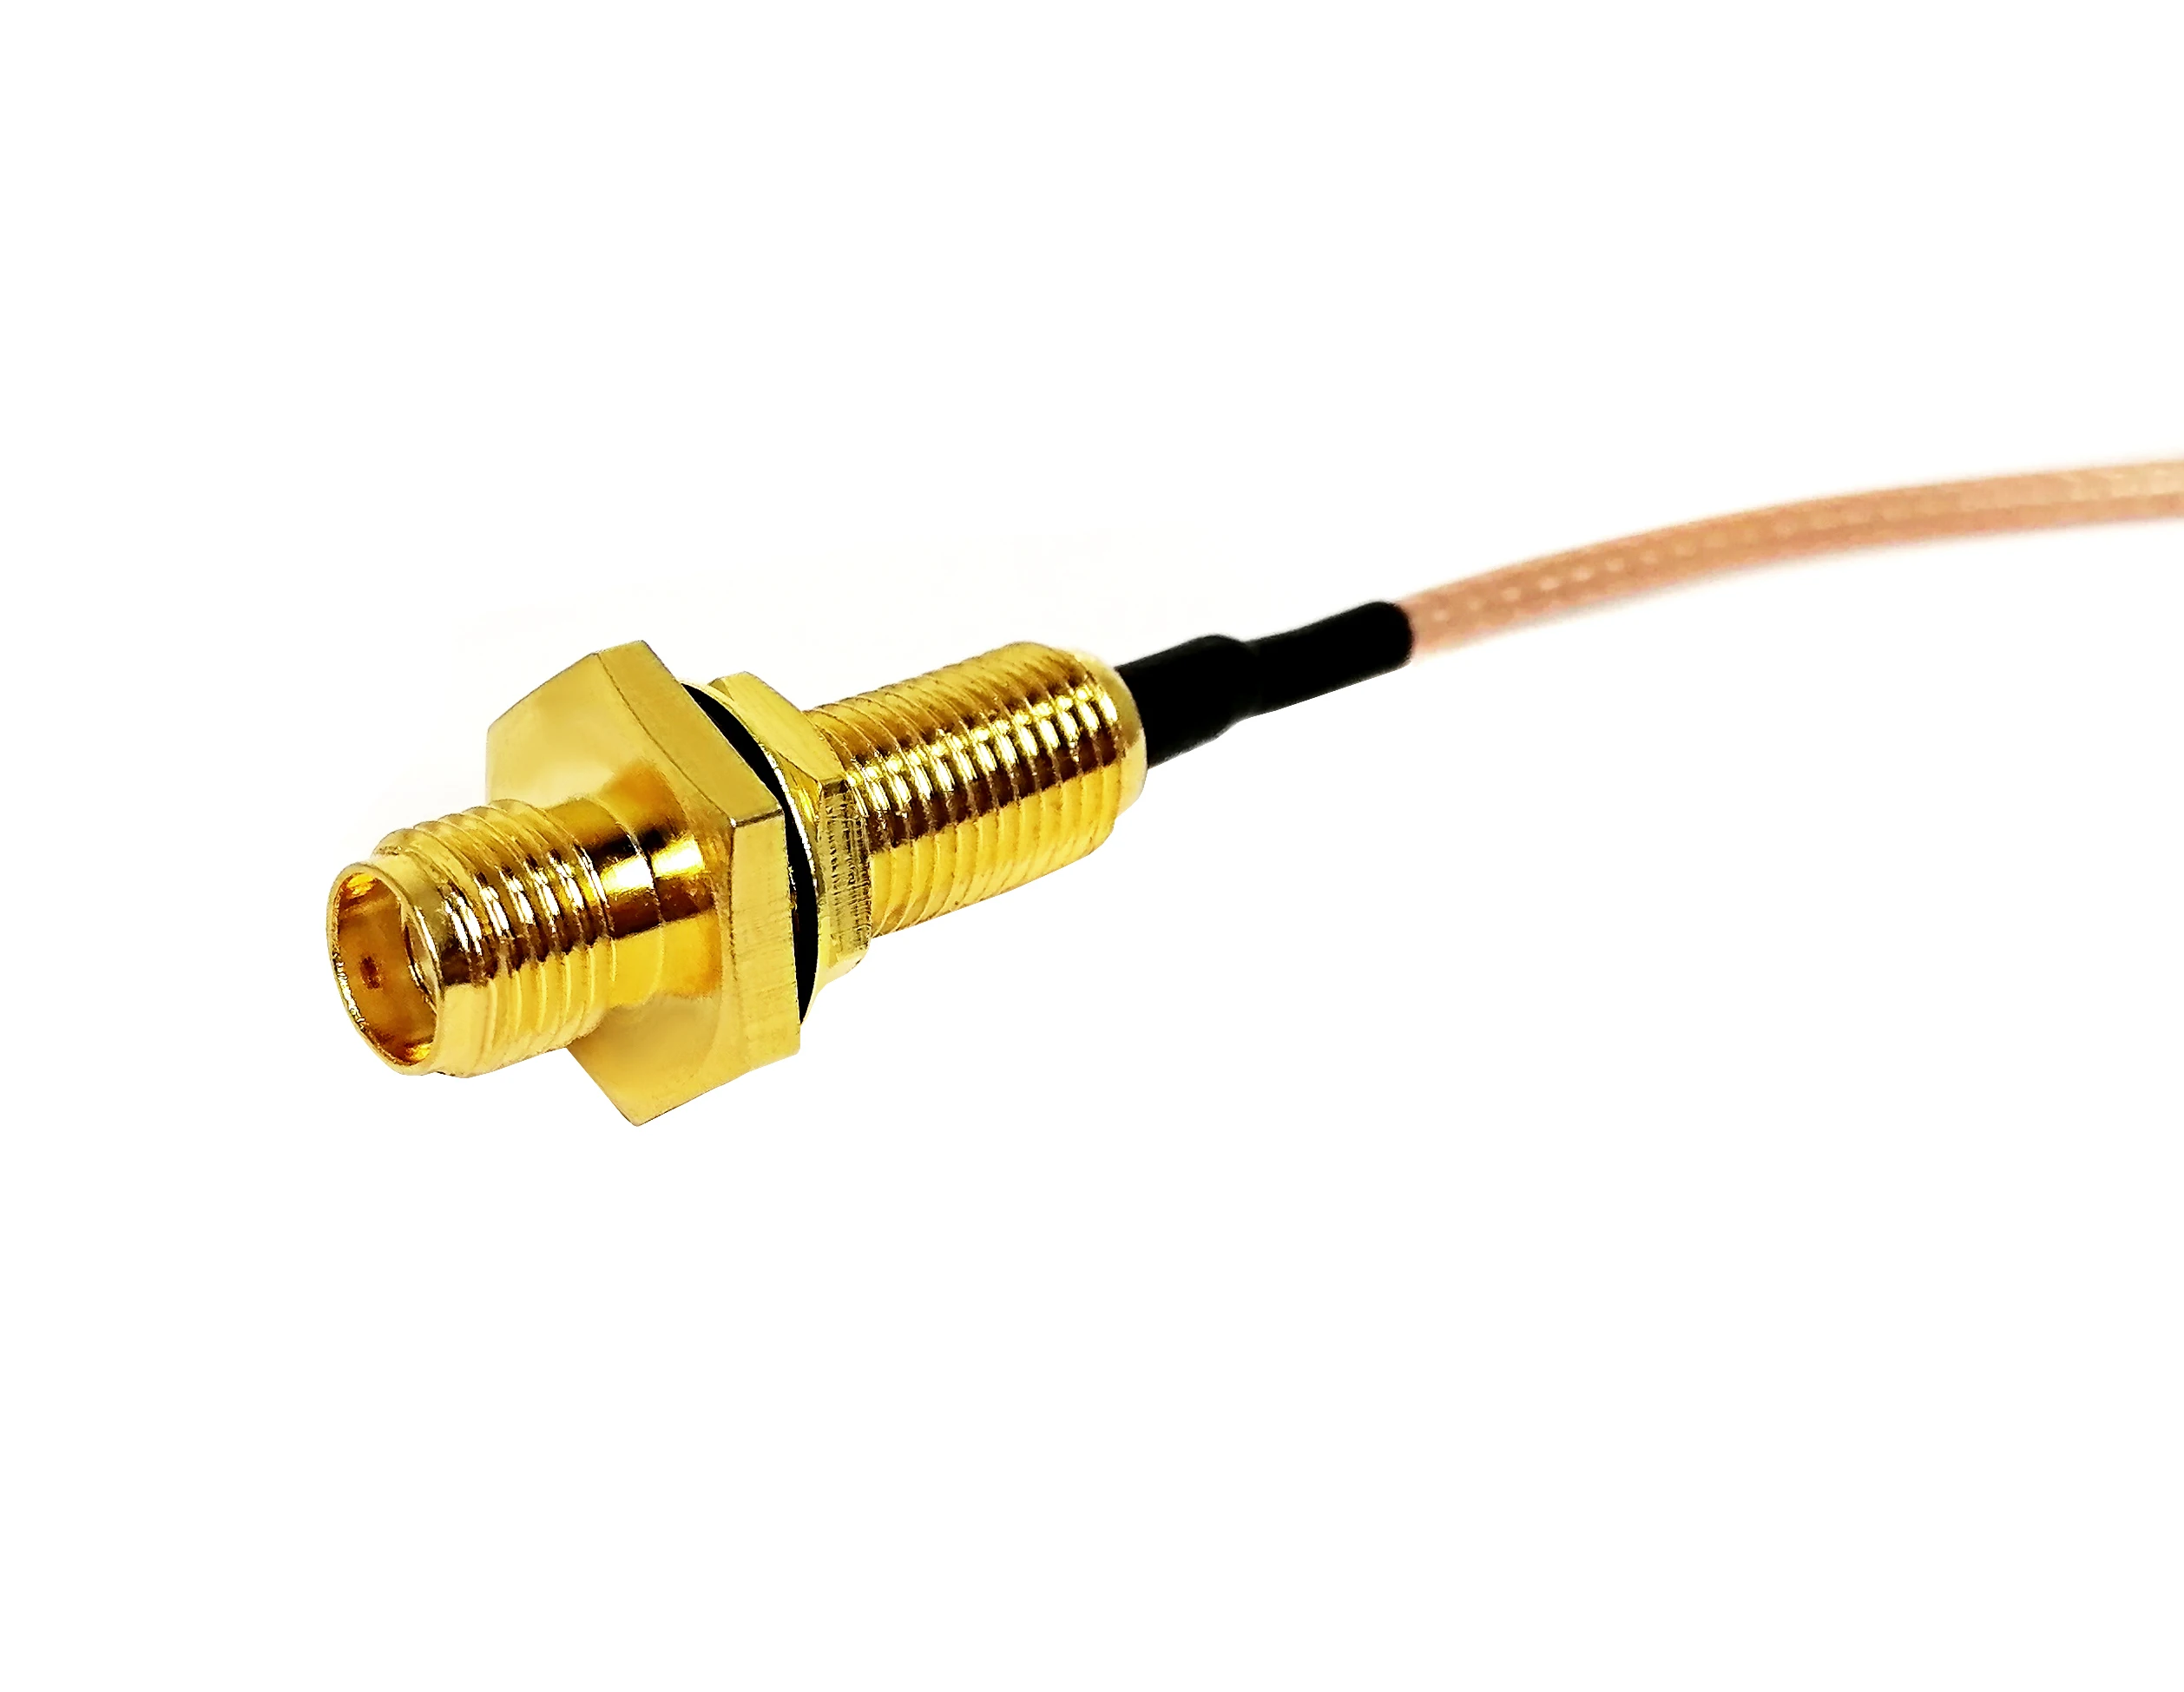 SMA female straight bulkhead waterproof  to Ipex MHV UFL  male right angle elbow rg178 jumper cable assembly details